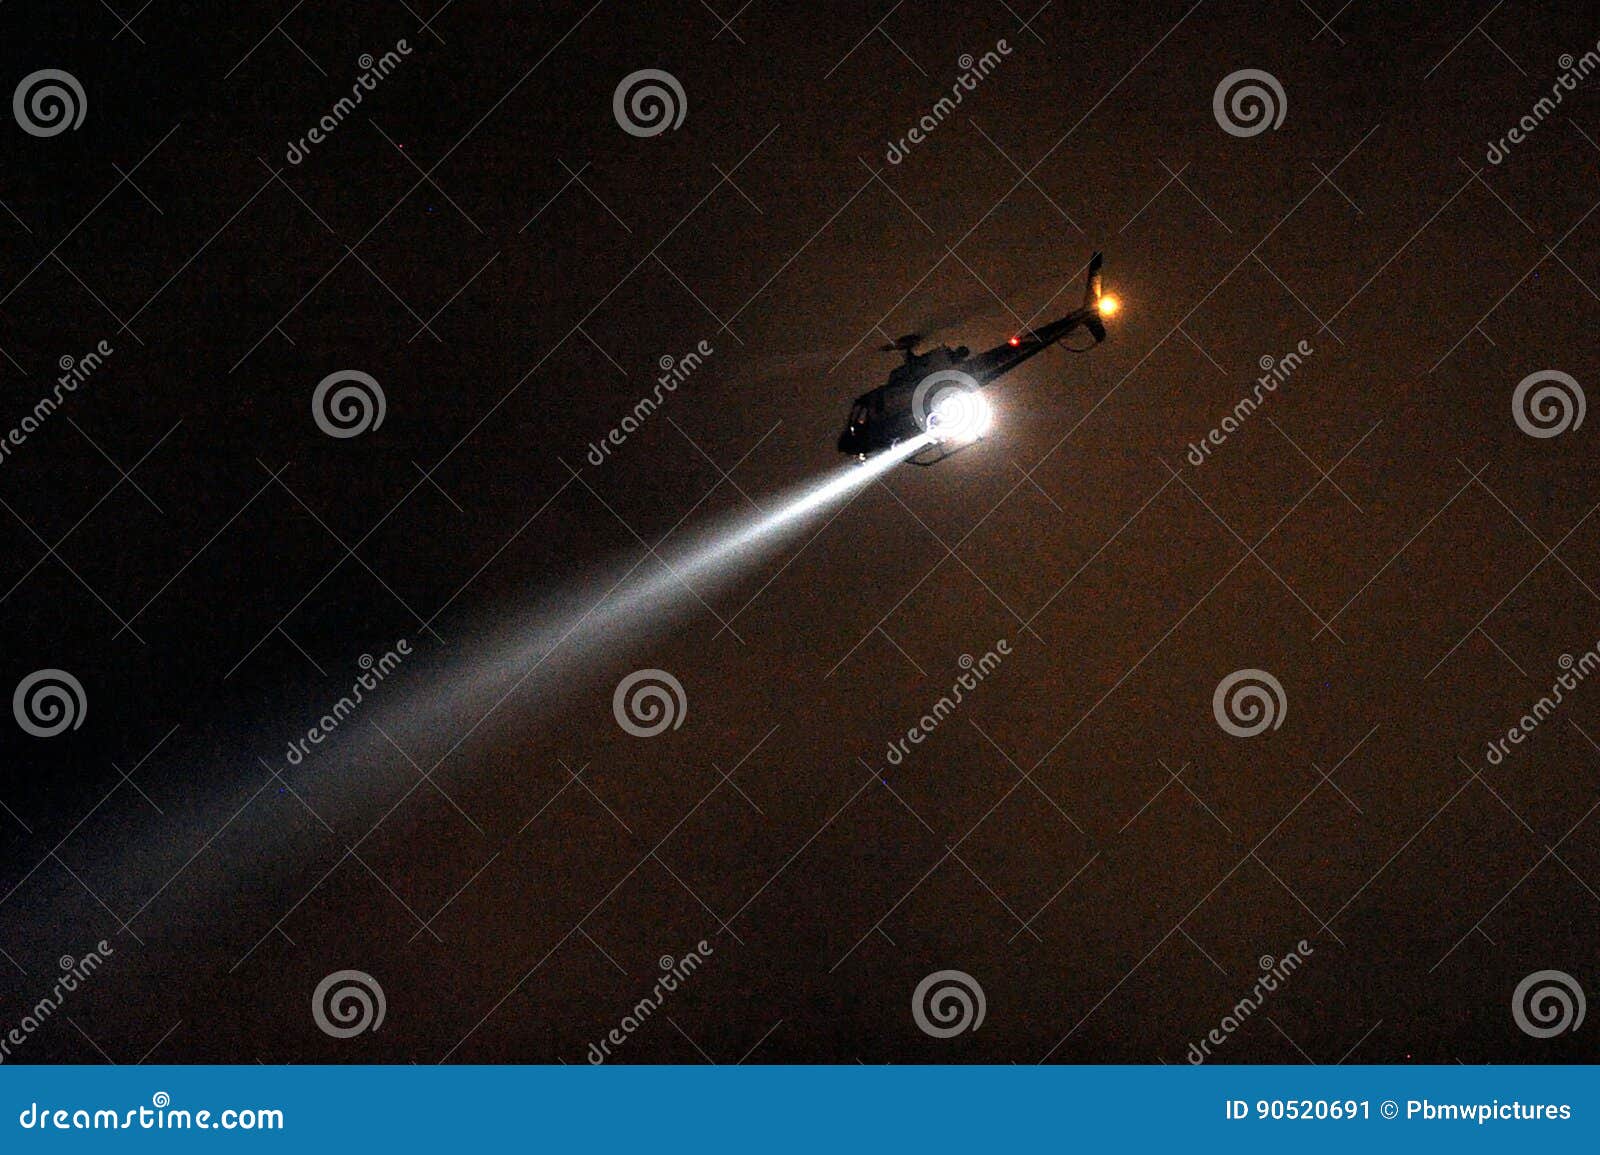 police helicopter with searchlight at night